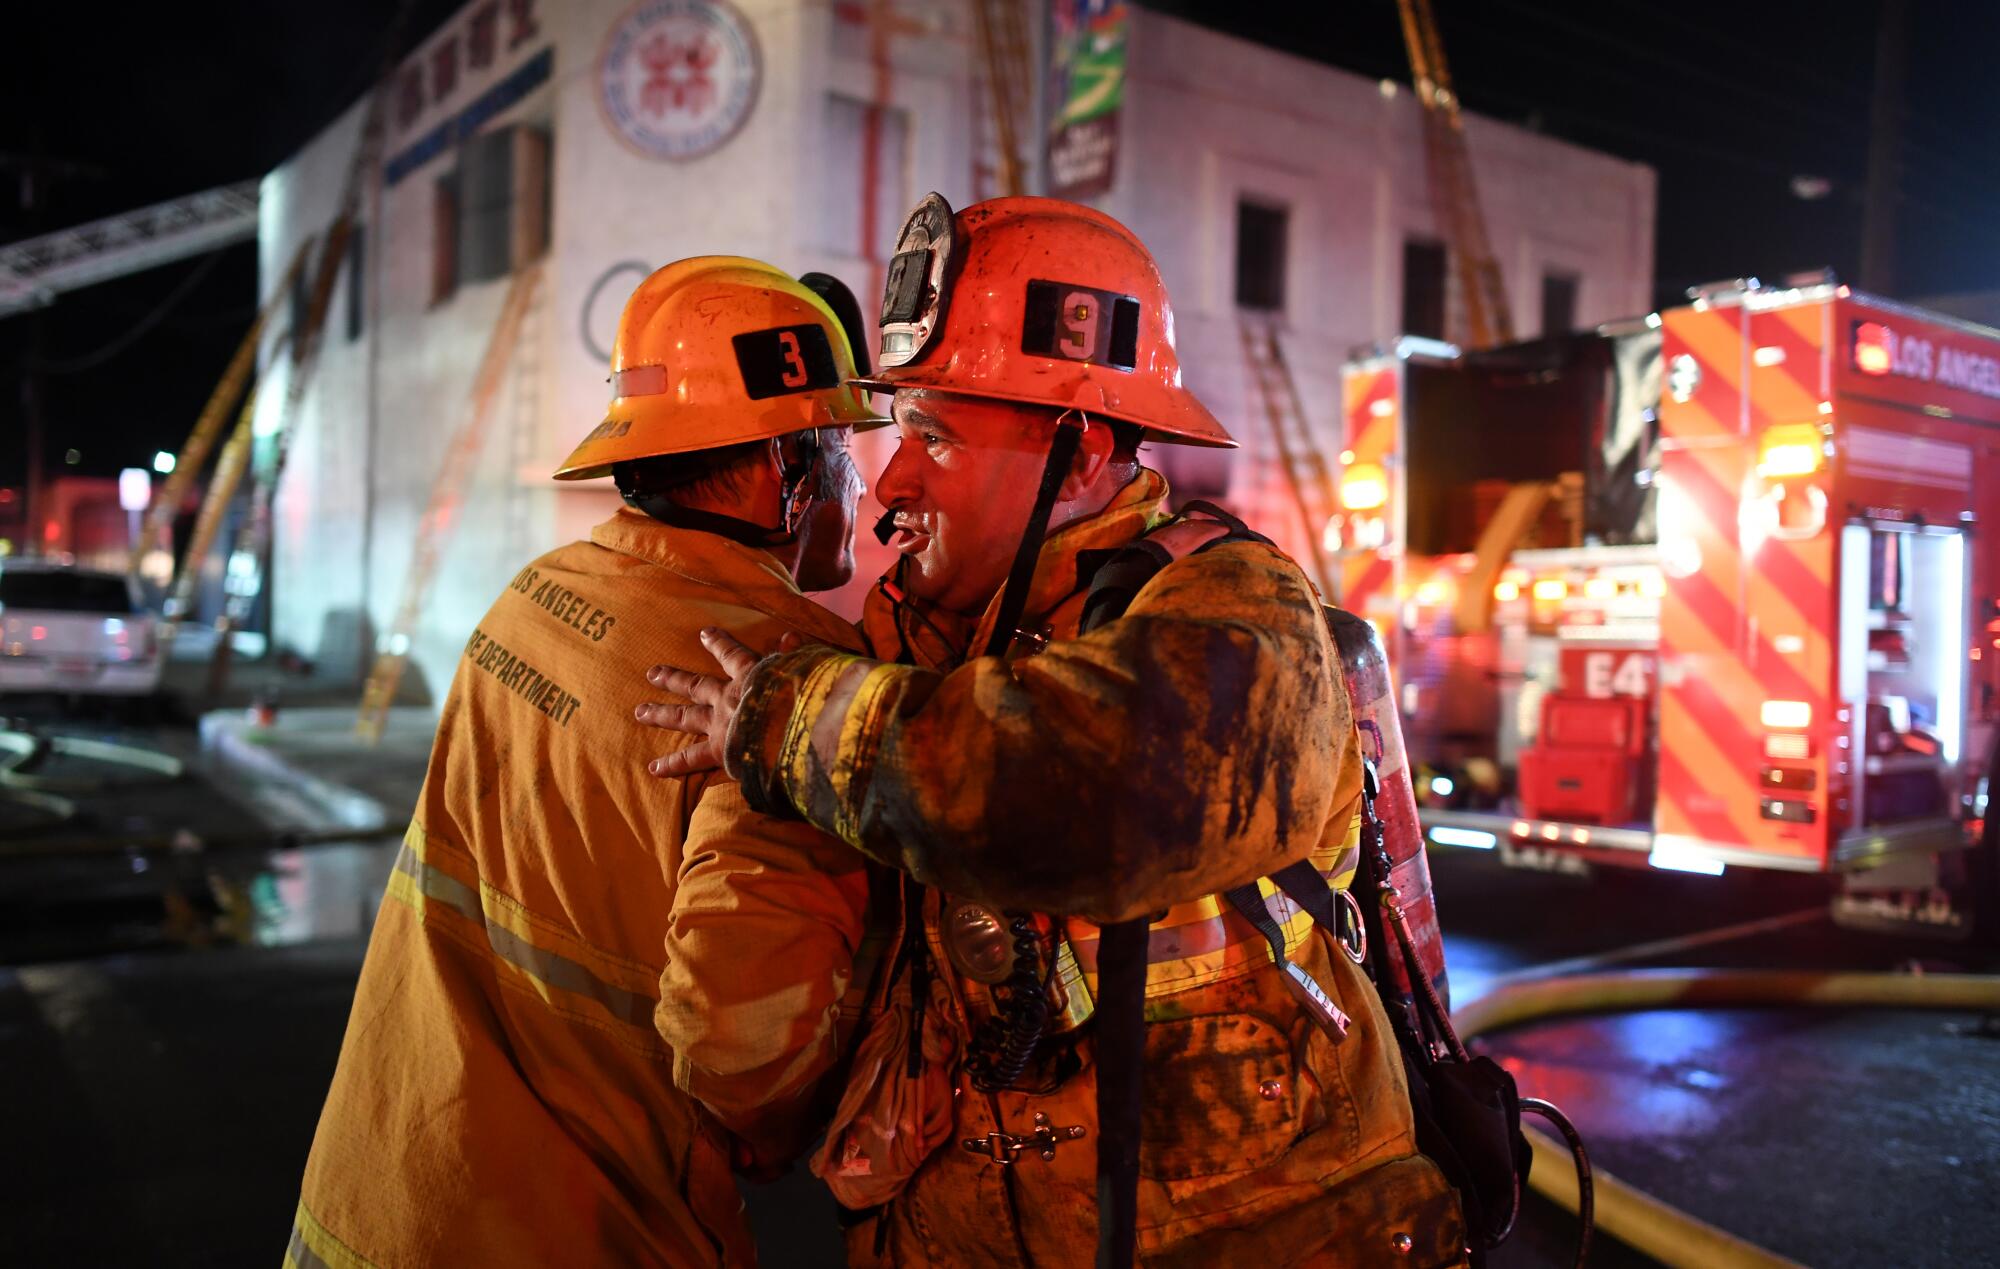 Station No. 9 firefighter Ray Robles, right, hugs a comrade after battling a predawn fire in downtown Los Angeles